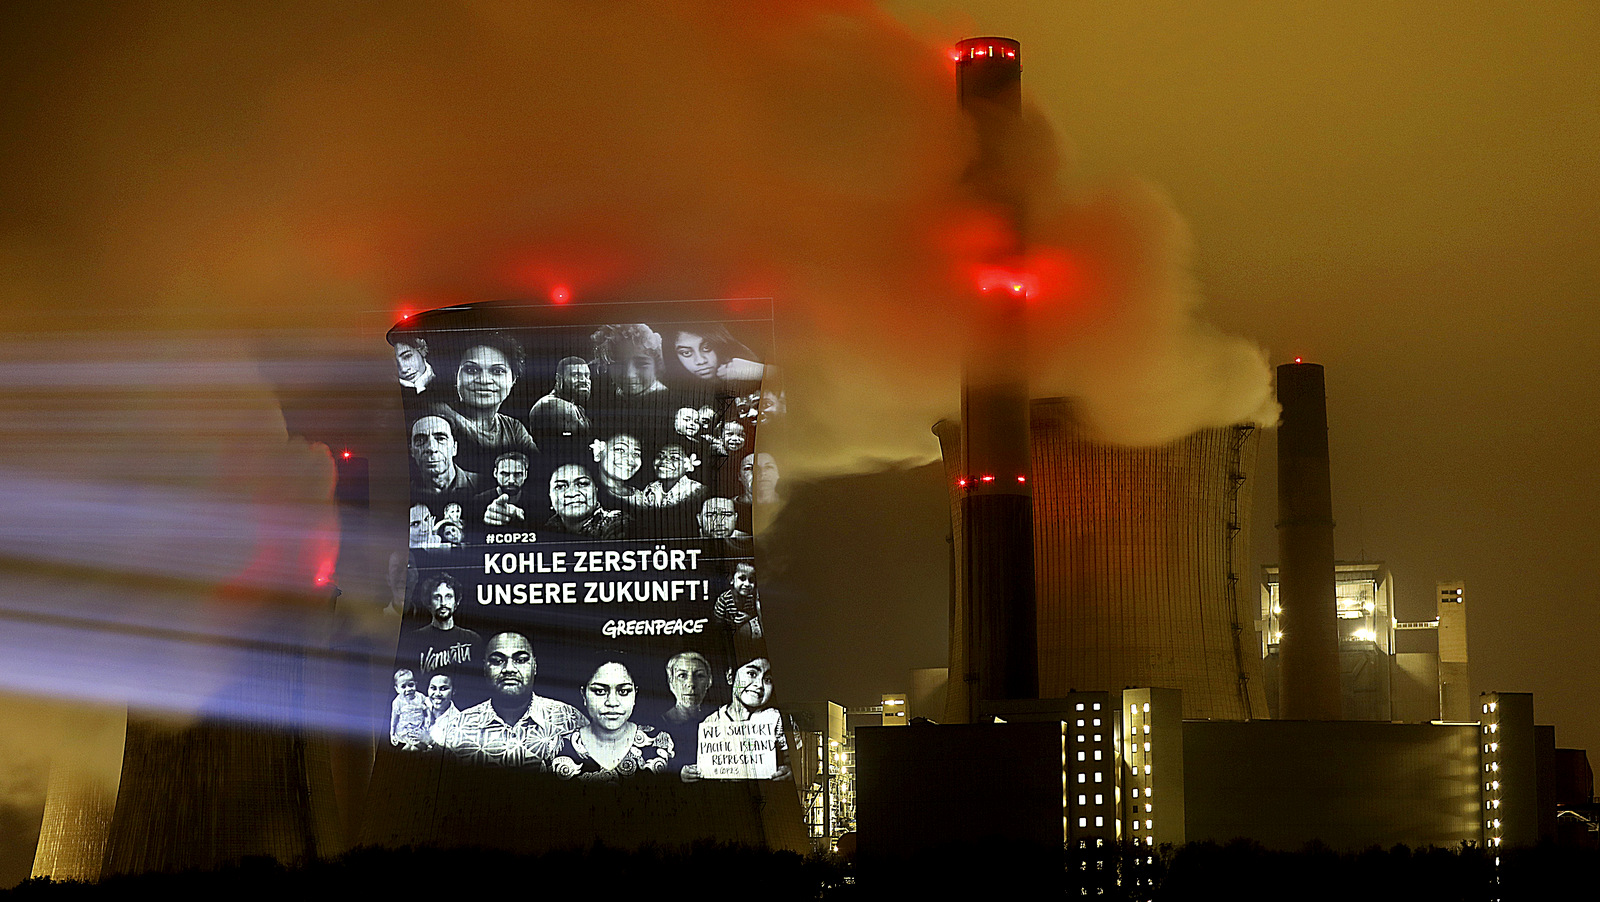 Greenpeace activists project the writing "Coal destroys our future" on the cooling tower of the lignite power plant Neurath near Grevenbroich, western Germany, Nov. 10, 2017 during the global climate meeting in nearby Bonn. (Oliver Berg/AP)